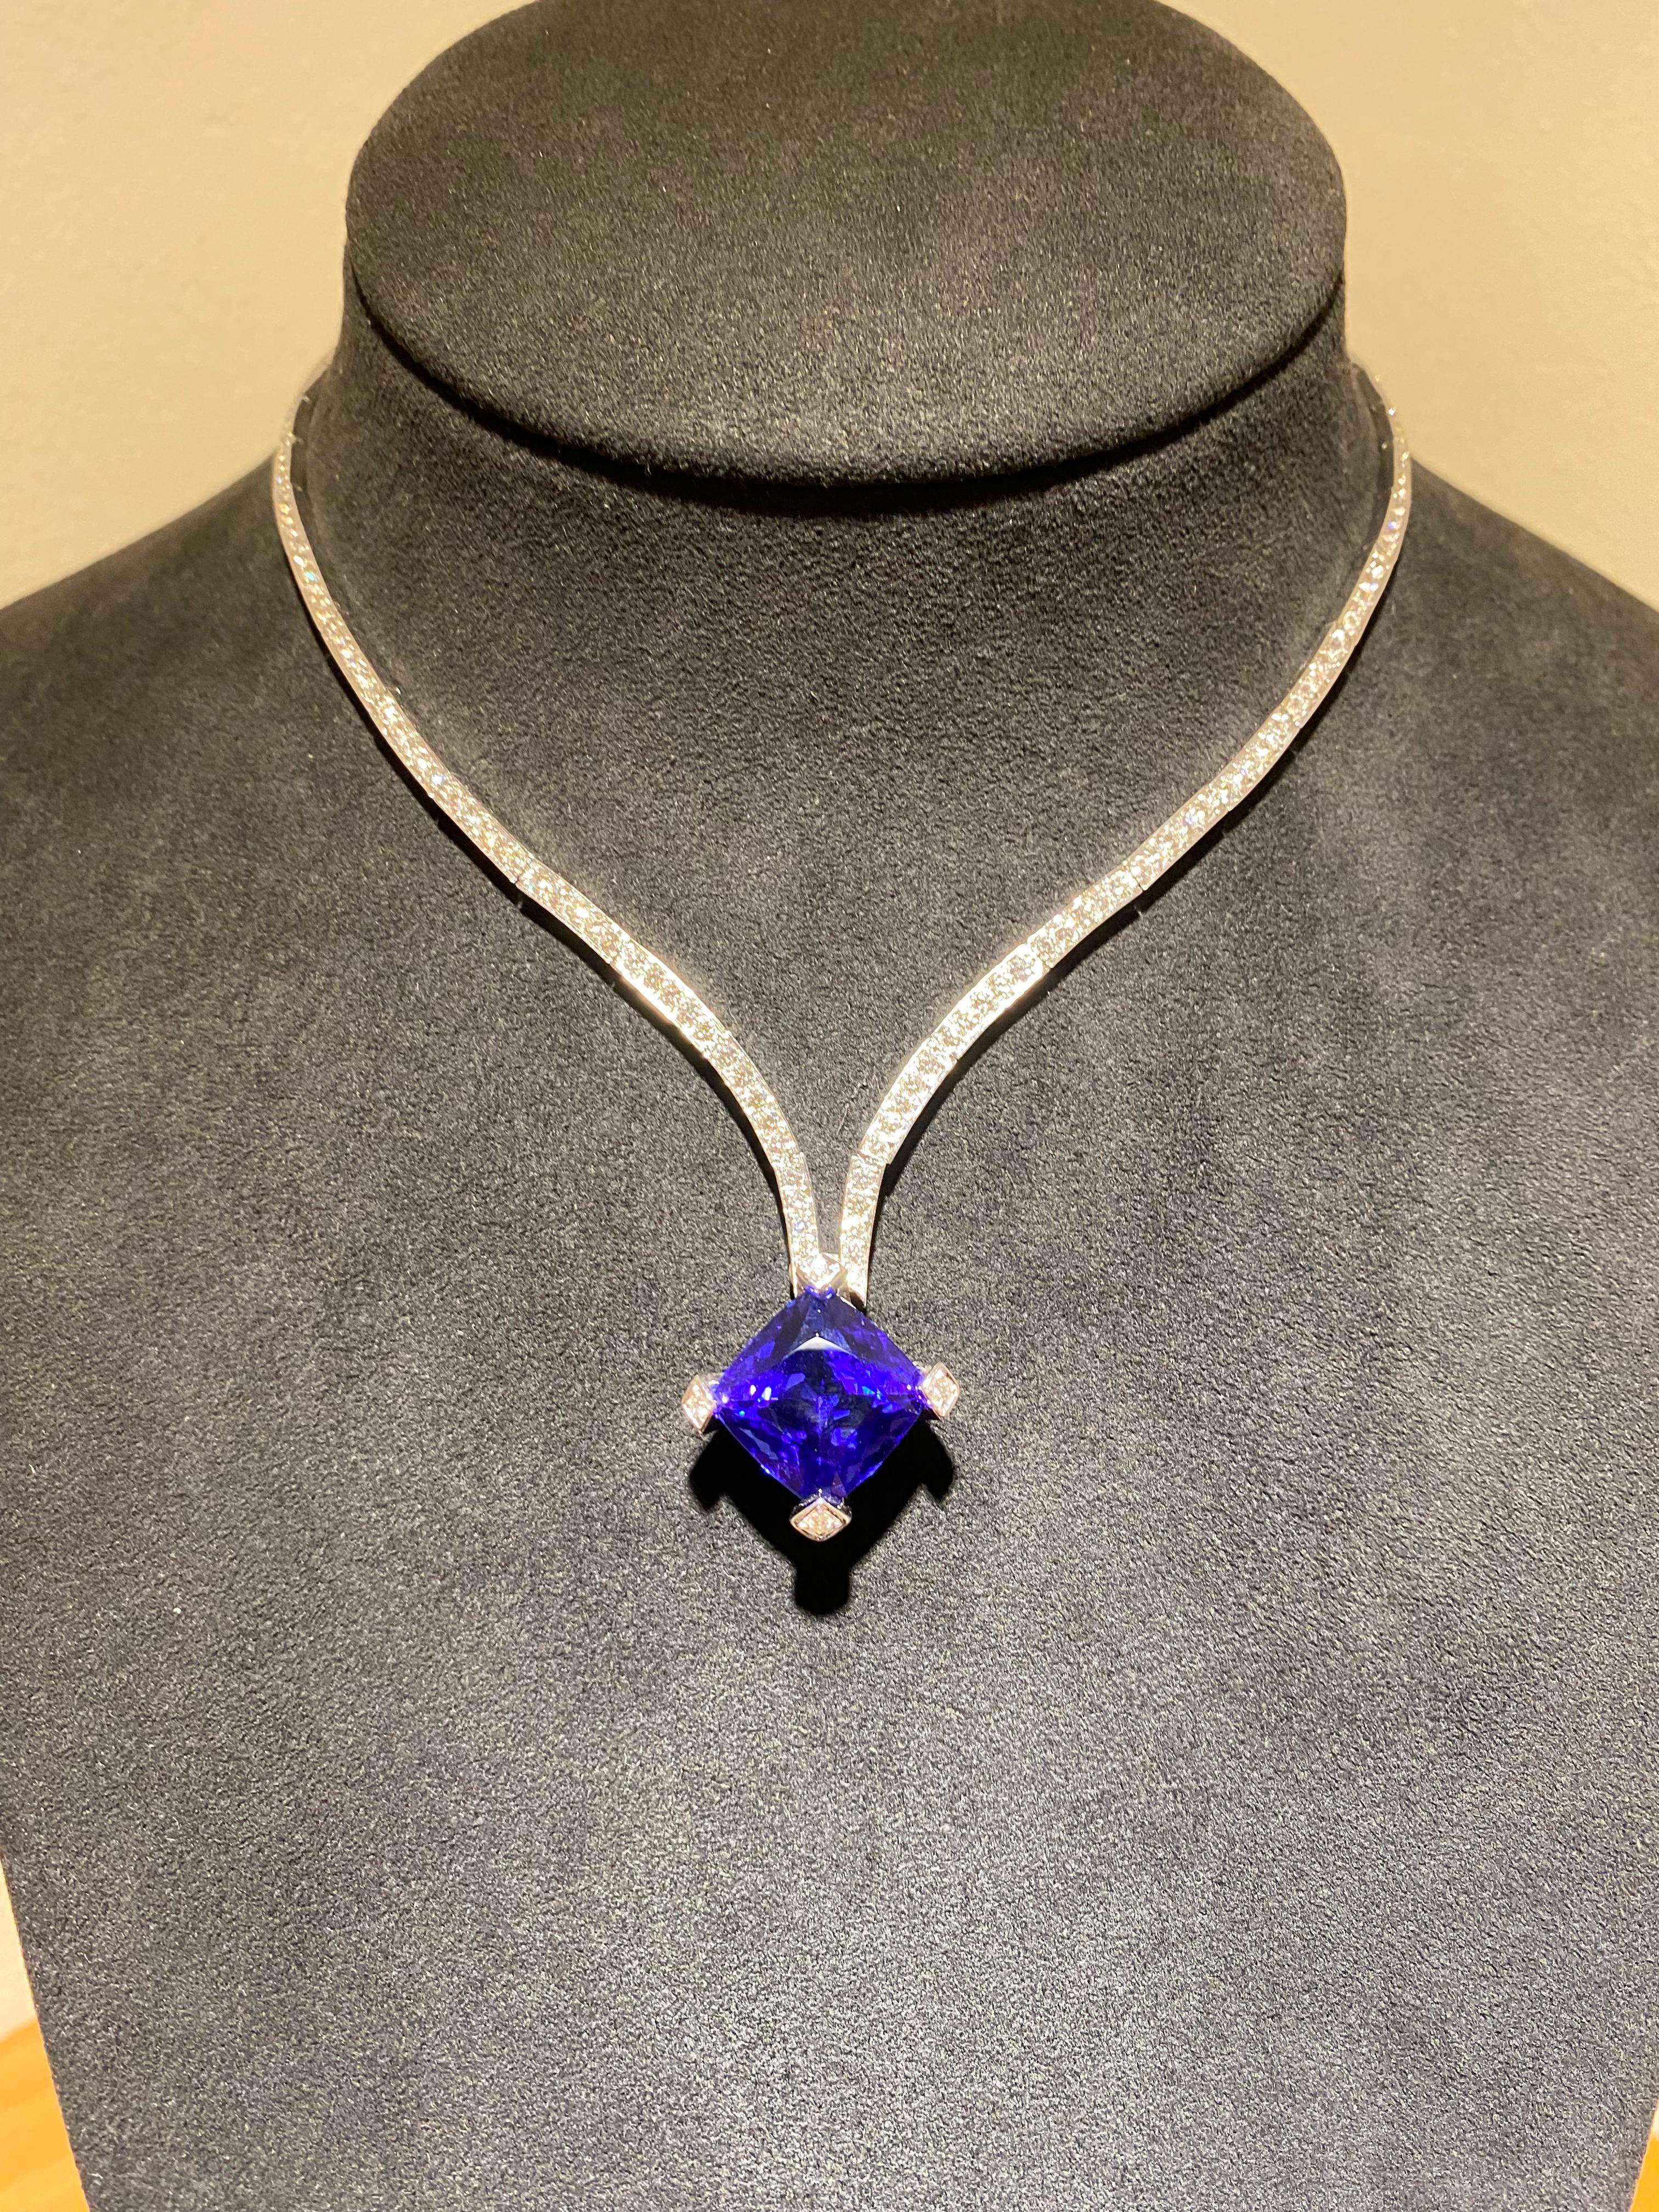 Introducing a masterpiece of Italian haute joaillerie crafted by the renowned maestro Scavia, this Pendant Necklace is a stunning embodiment of elegance and sophistication. The pendant features a captivating tanzanite suspended gracefully along a